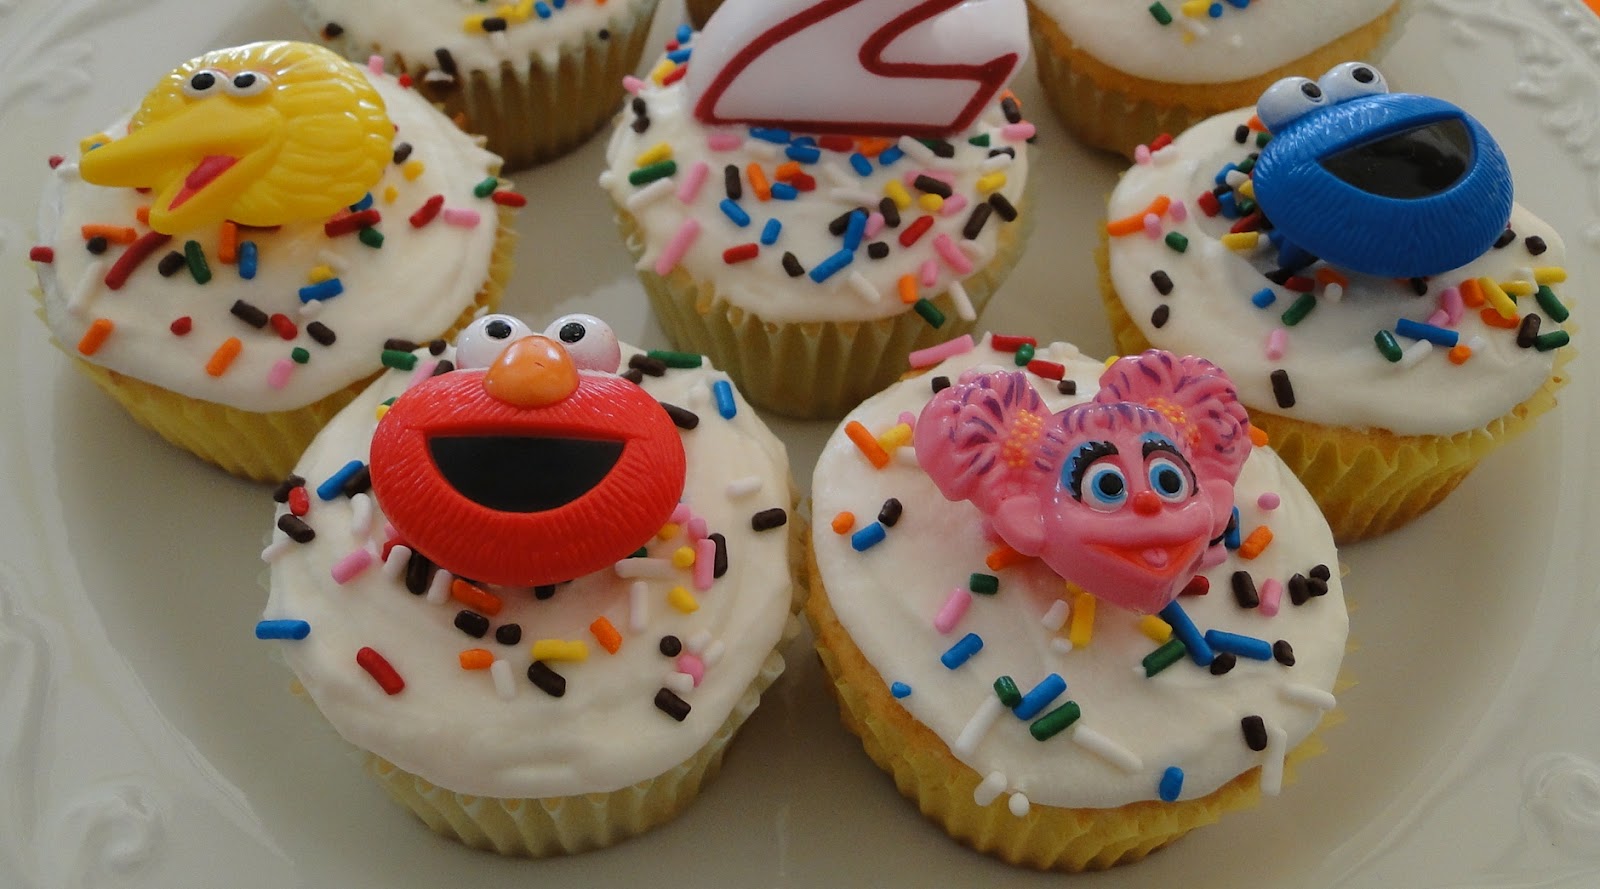 cool cake designs Kiddo Project: Kid's Birthday Party Cupcake Ideas